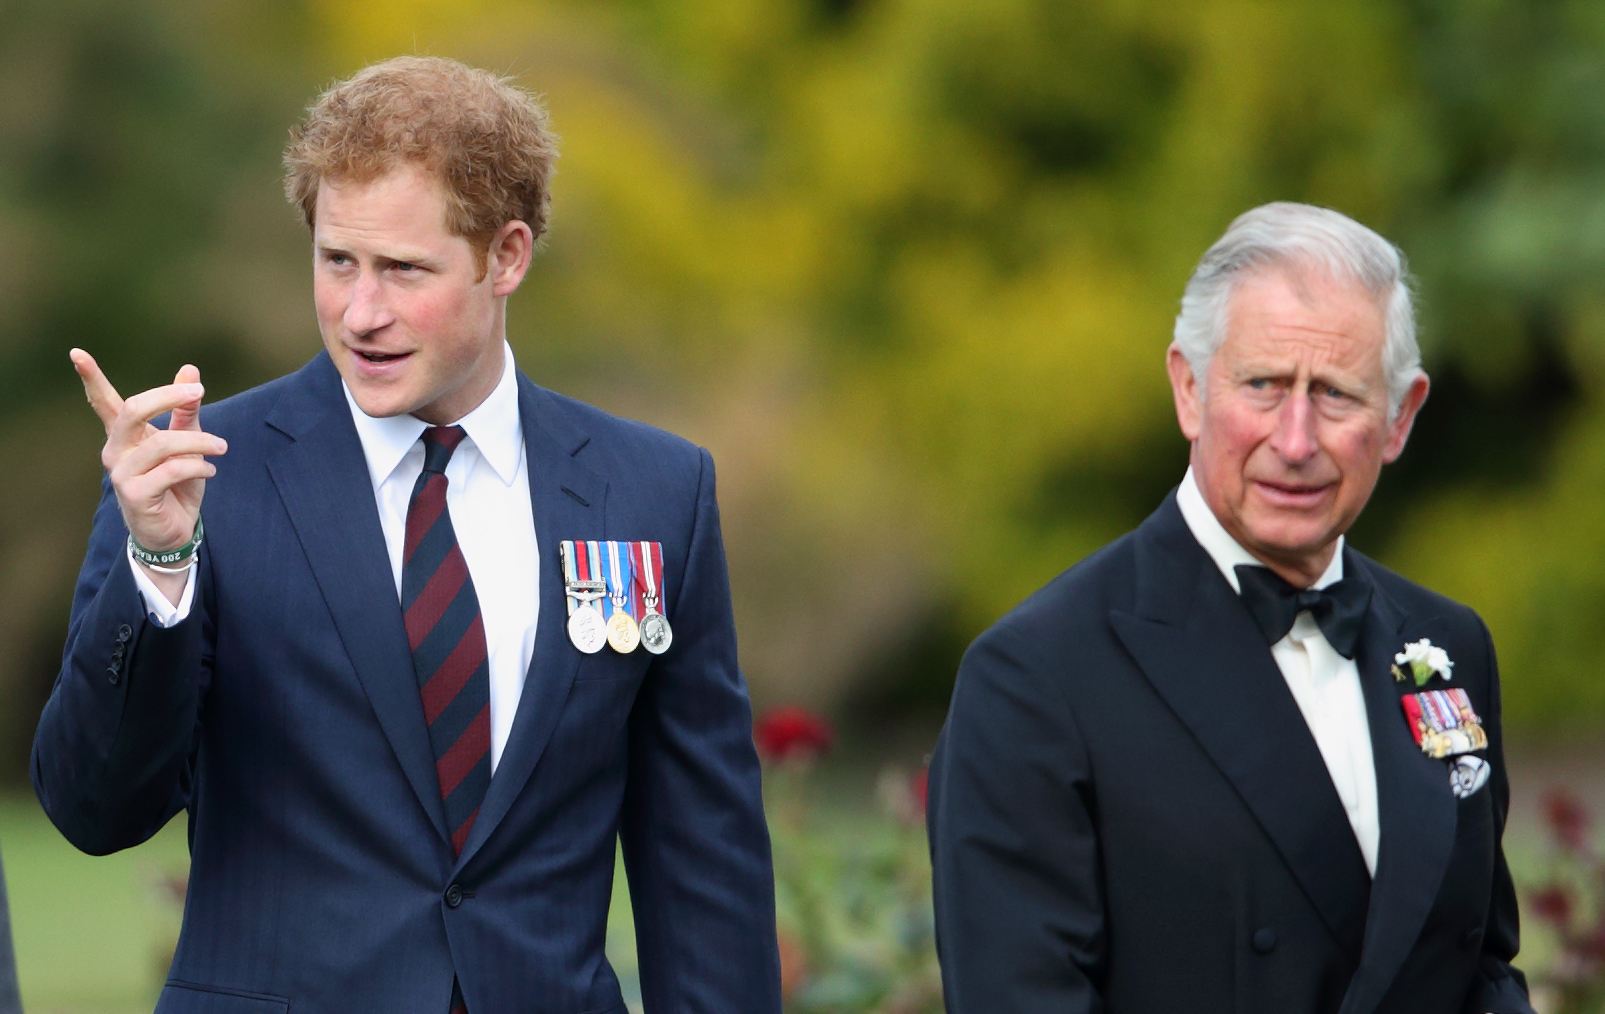 Prince Harry and King Charles III in London in 2015 | Source: Getty Images